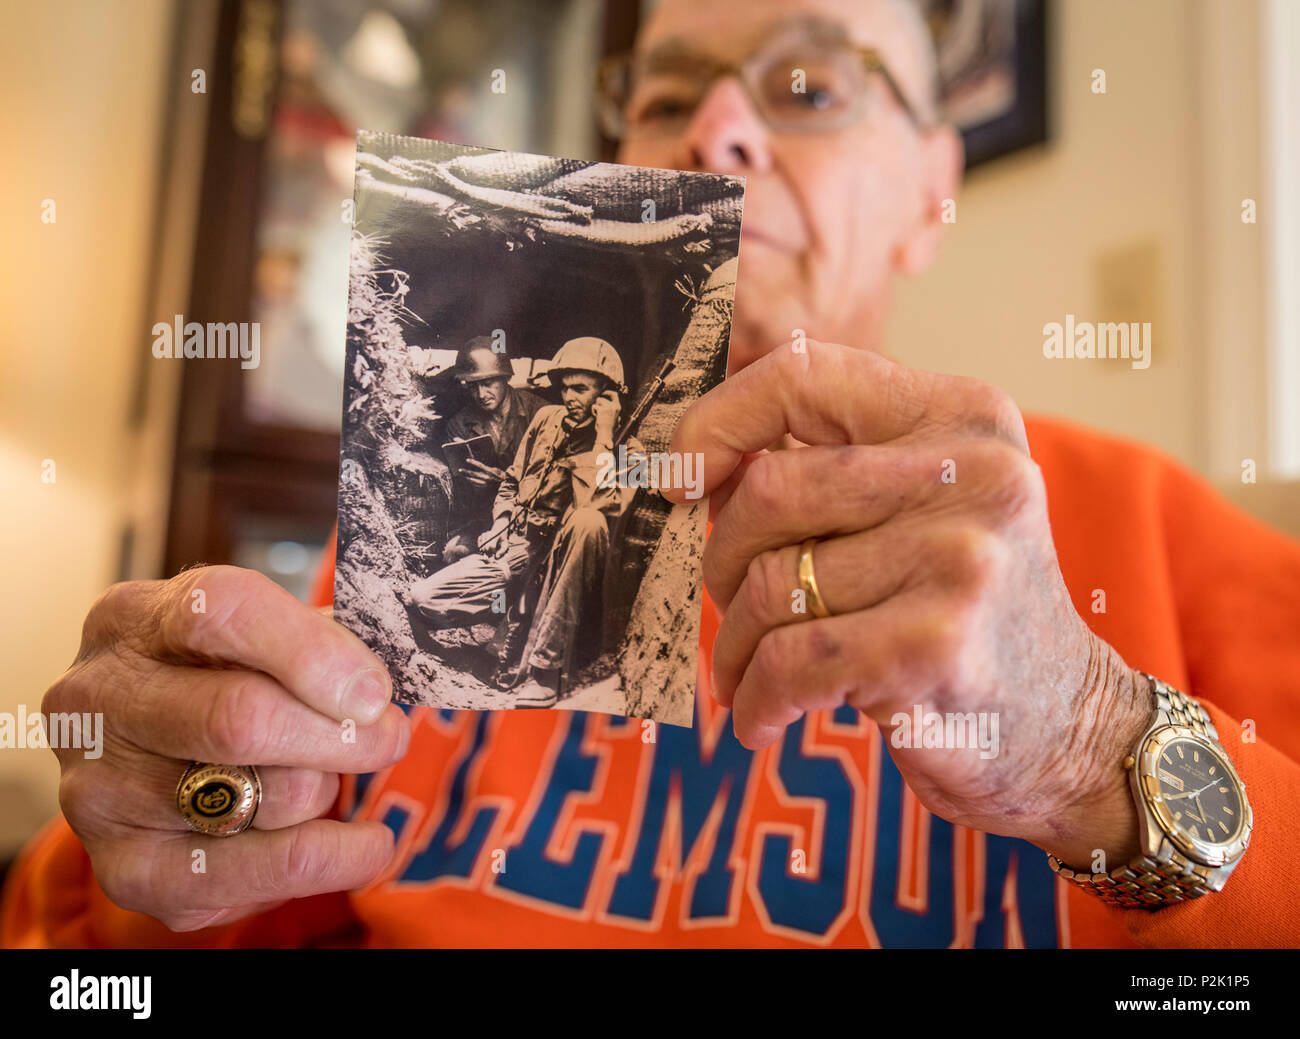 Former U.S. Army 1st Lt. William H. Funchess, 89, who endured 34 months as a prisoner of war during the Korean War, holds a photo of himself in a bunker taken during an engagement in July of 1950 near the Kum River north of Taejon, South Korea, Sept. 21, 2016. 'That was my first engagement. There were 13 Russian T-34 tanks across the river firing point-blank into us.' After his capture on Nov. 4 of that same year, Funchess was held in the same prison compound and became very close to Army Chaplain Father Emil J. Kapaun, who received the Medal of Honor posthumously in 2013 for his acts of coura Stock Photo